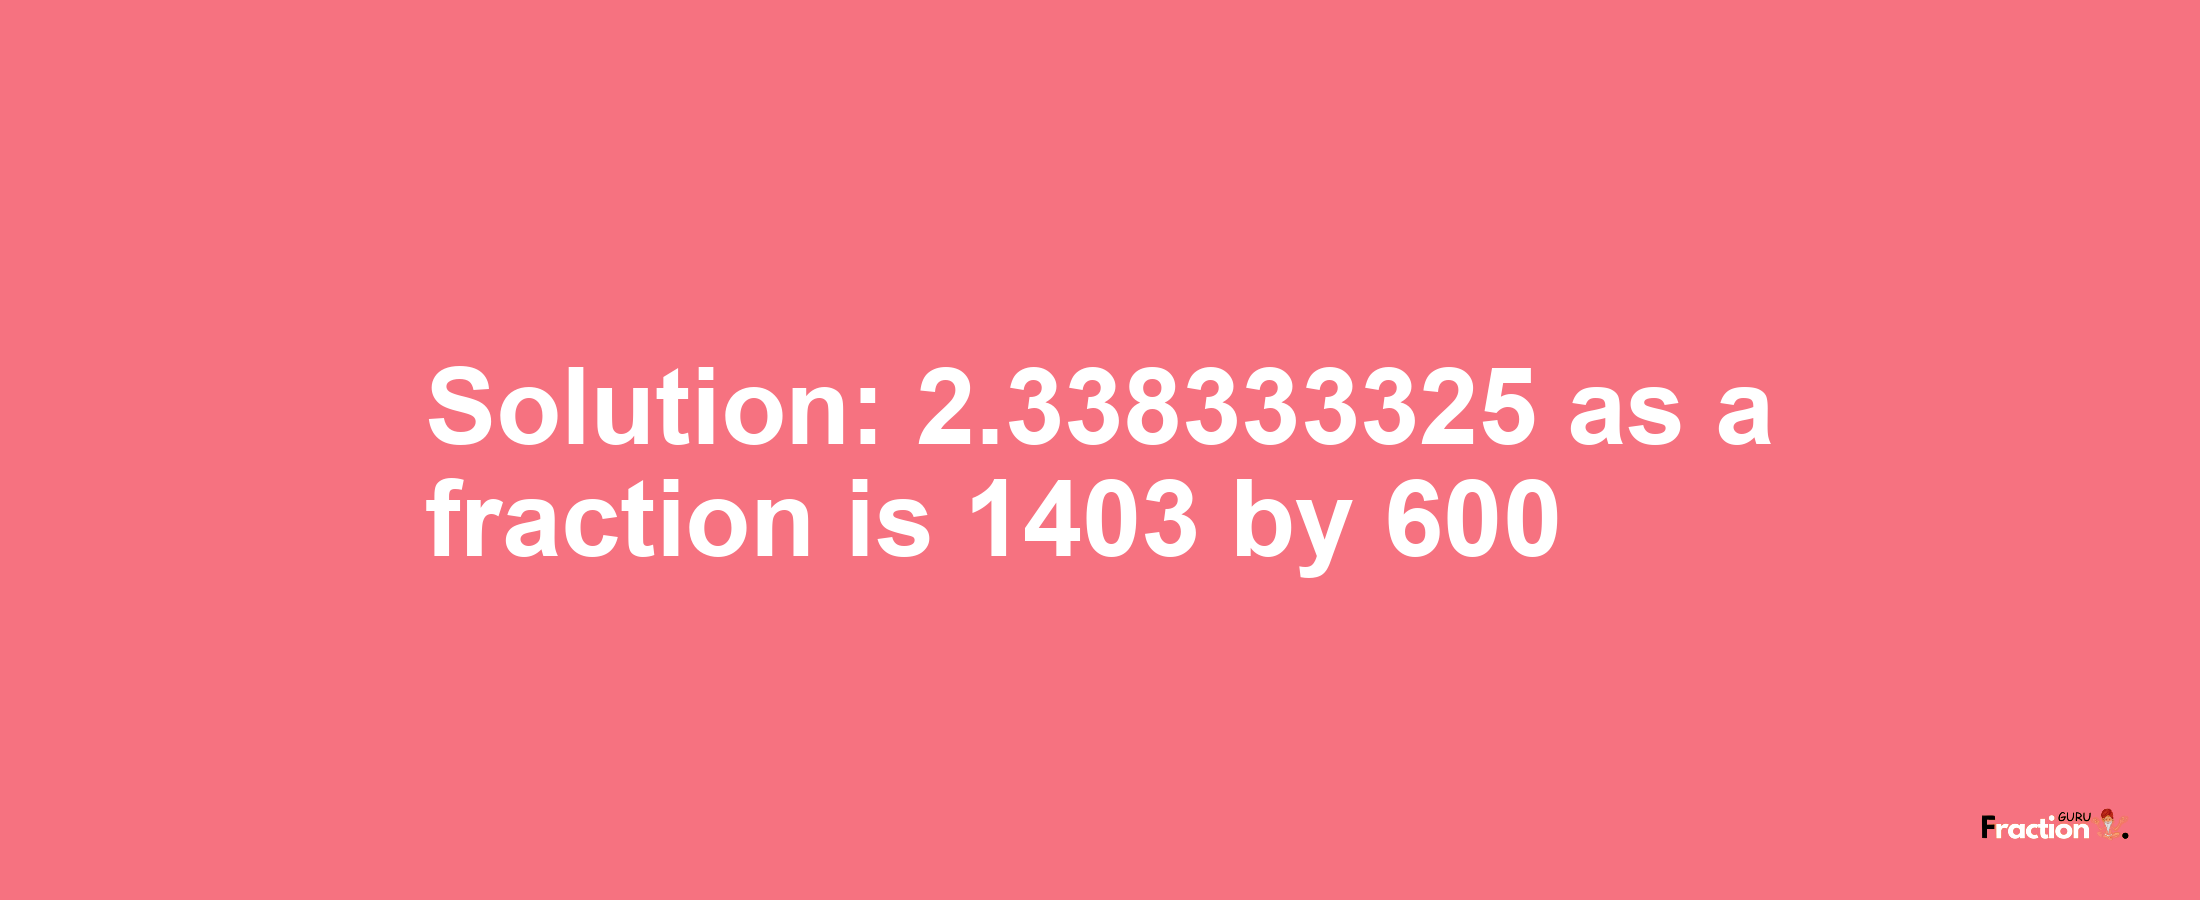 Solution:2.338333325 as a fraction is 1403/600